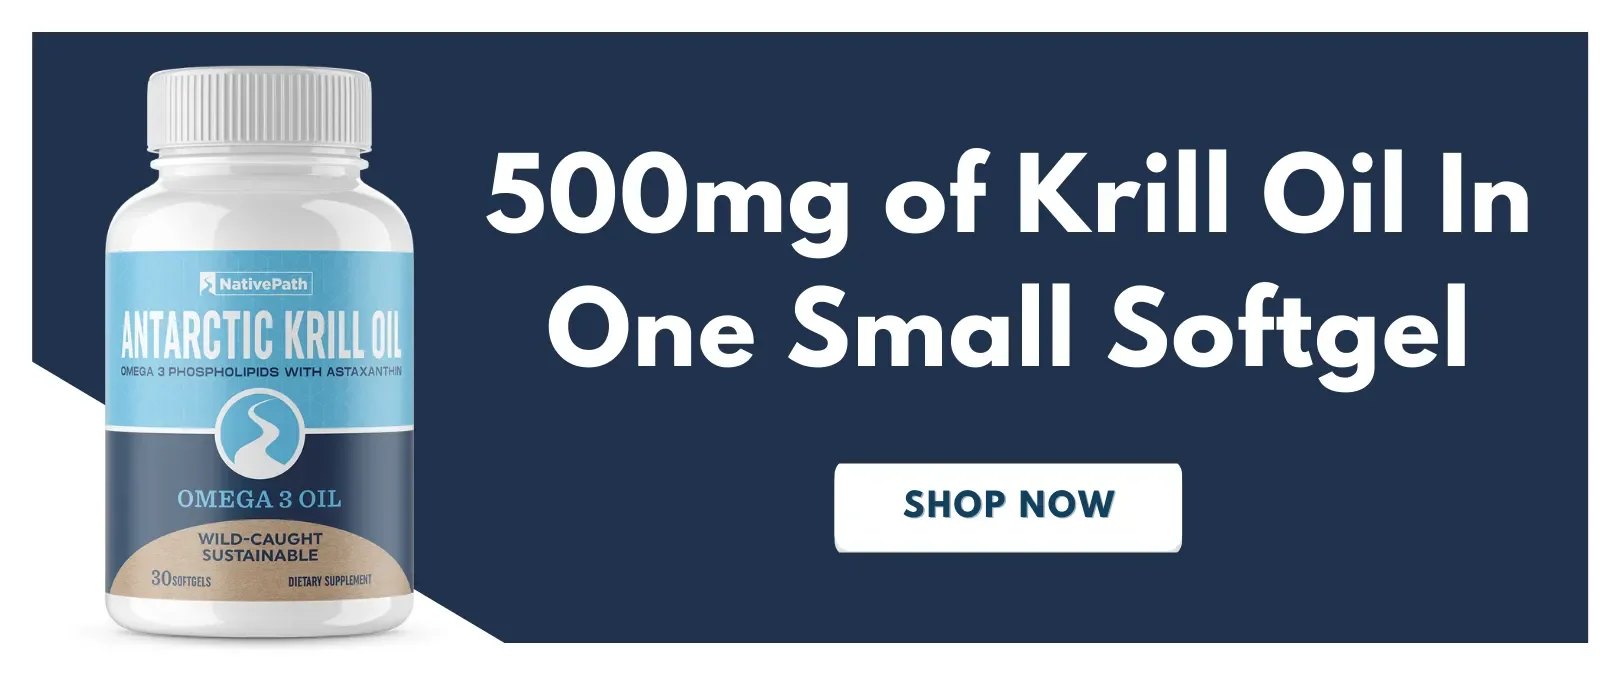 500mg of Krill Oil In One Small Softgel